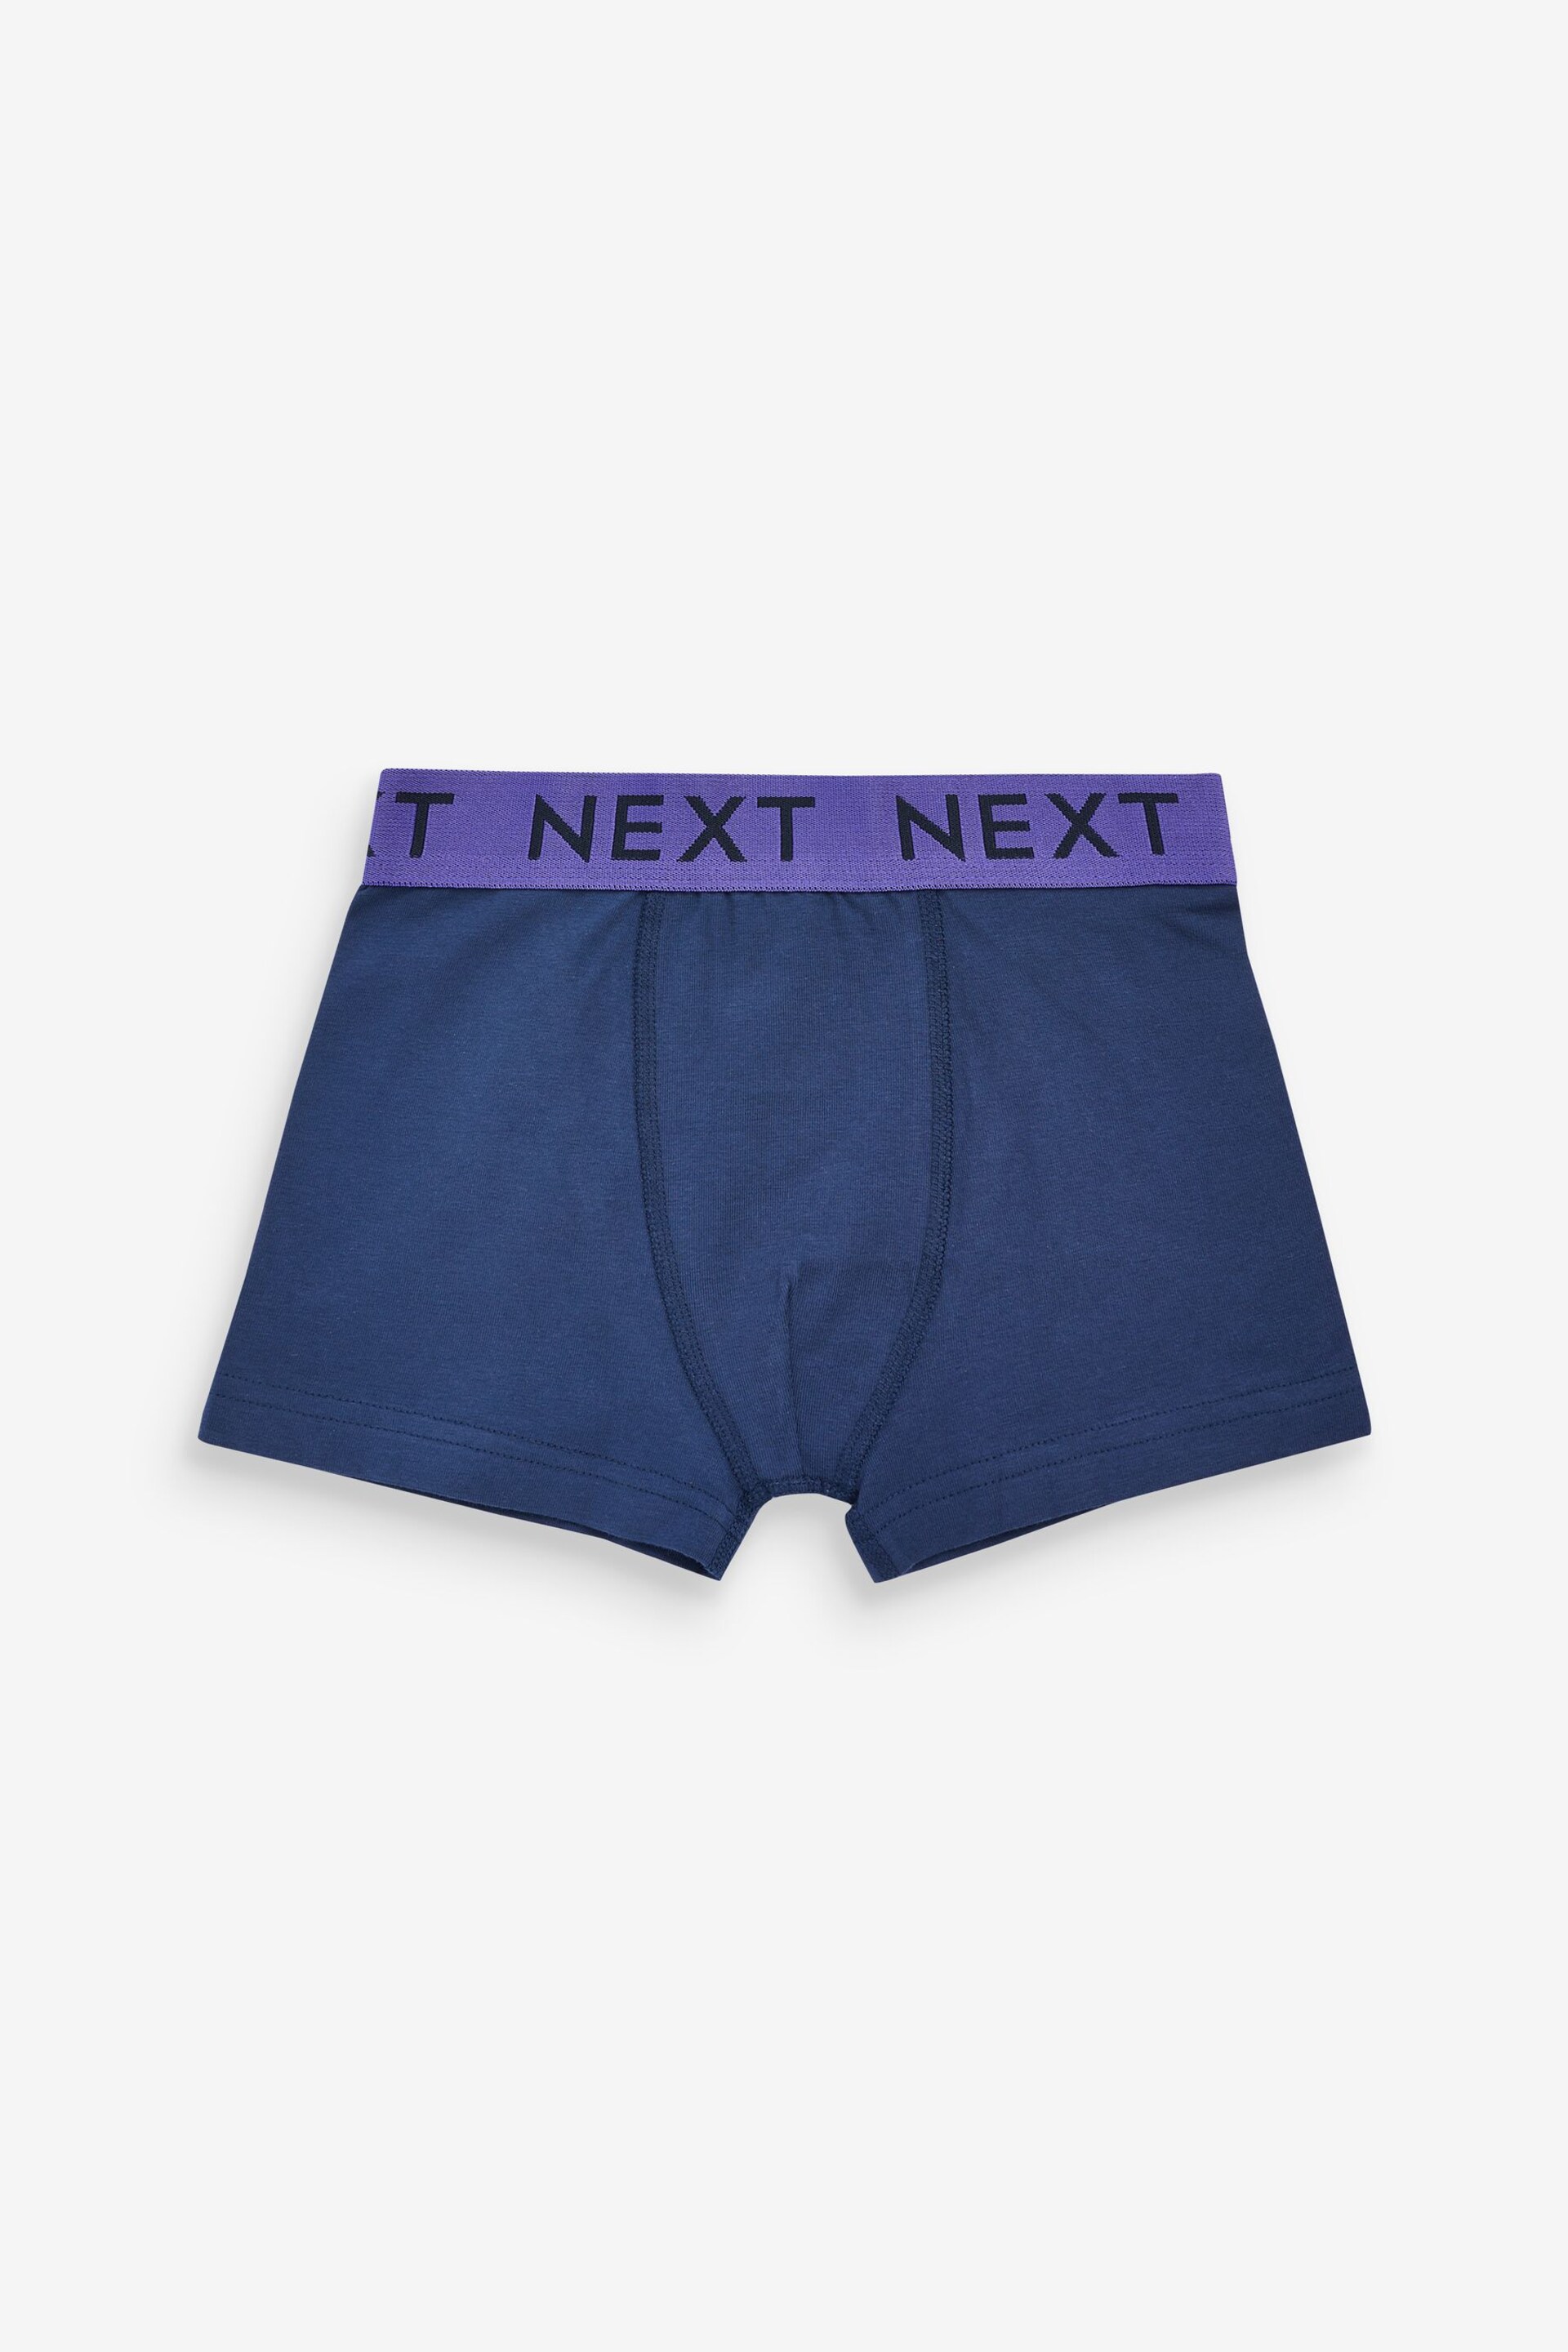 Navy Bright Waistband Trunks 10 Pack (1.5-16yrs) - Image 3 of 11